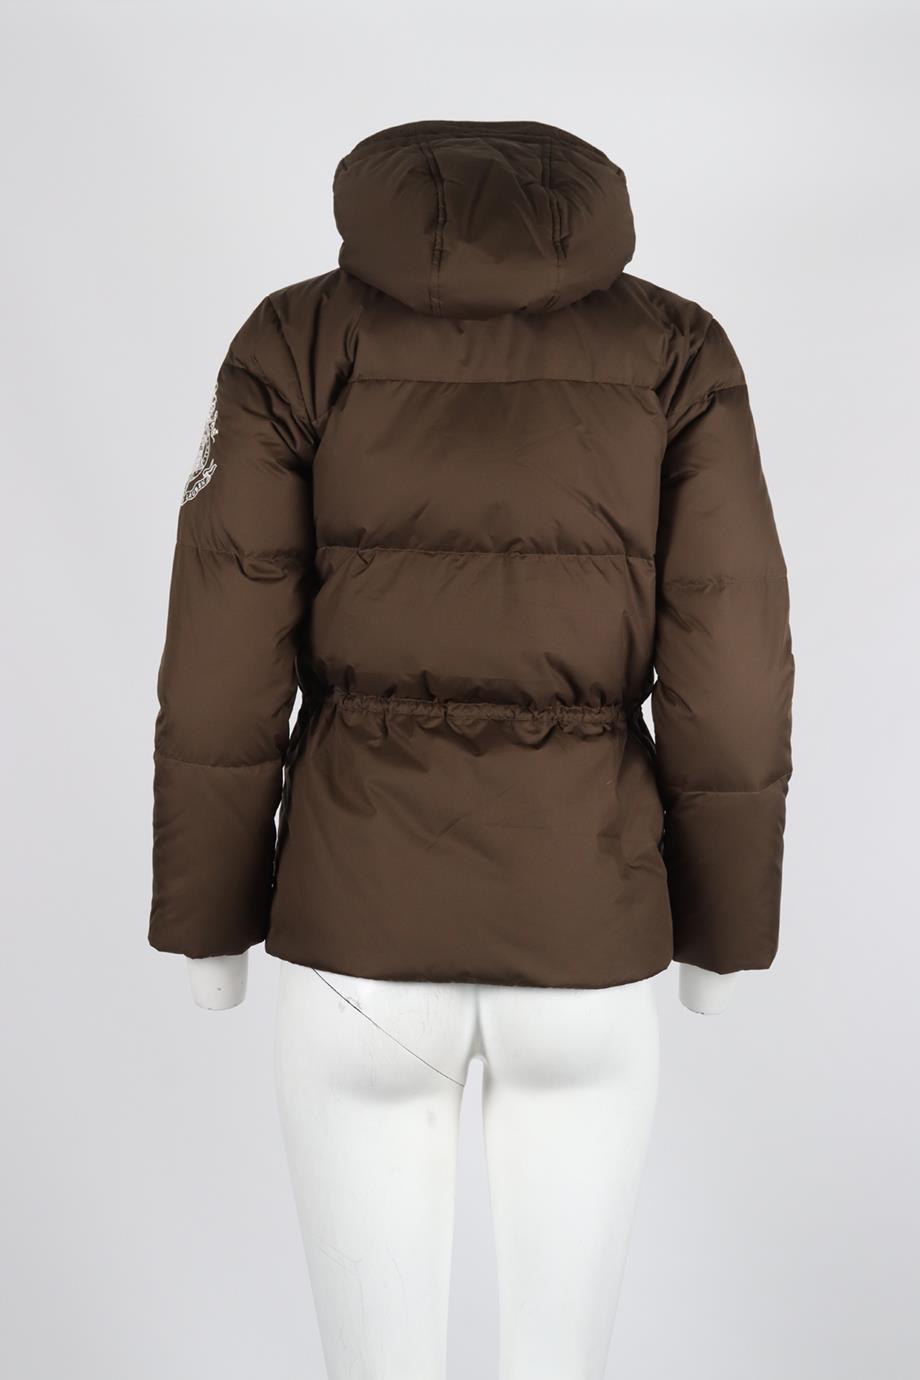 RALPH LAUREN QUILTED SHELL DOWN JACKET XLARGE